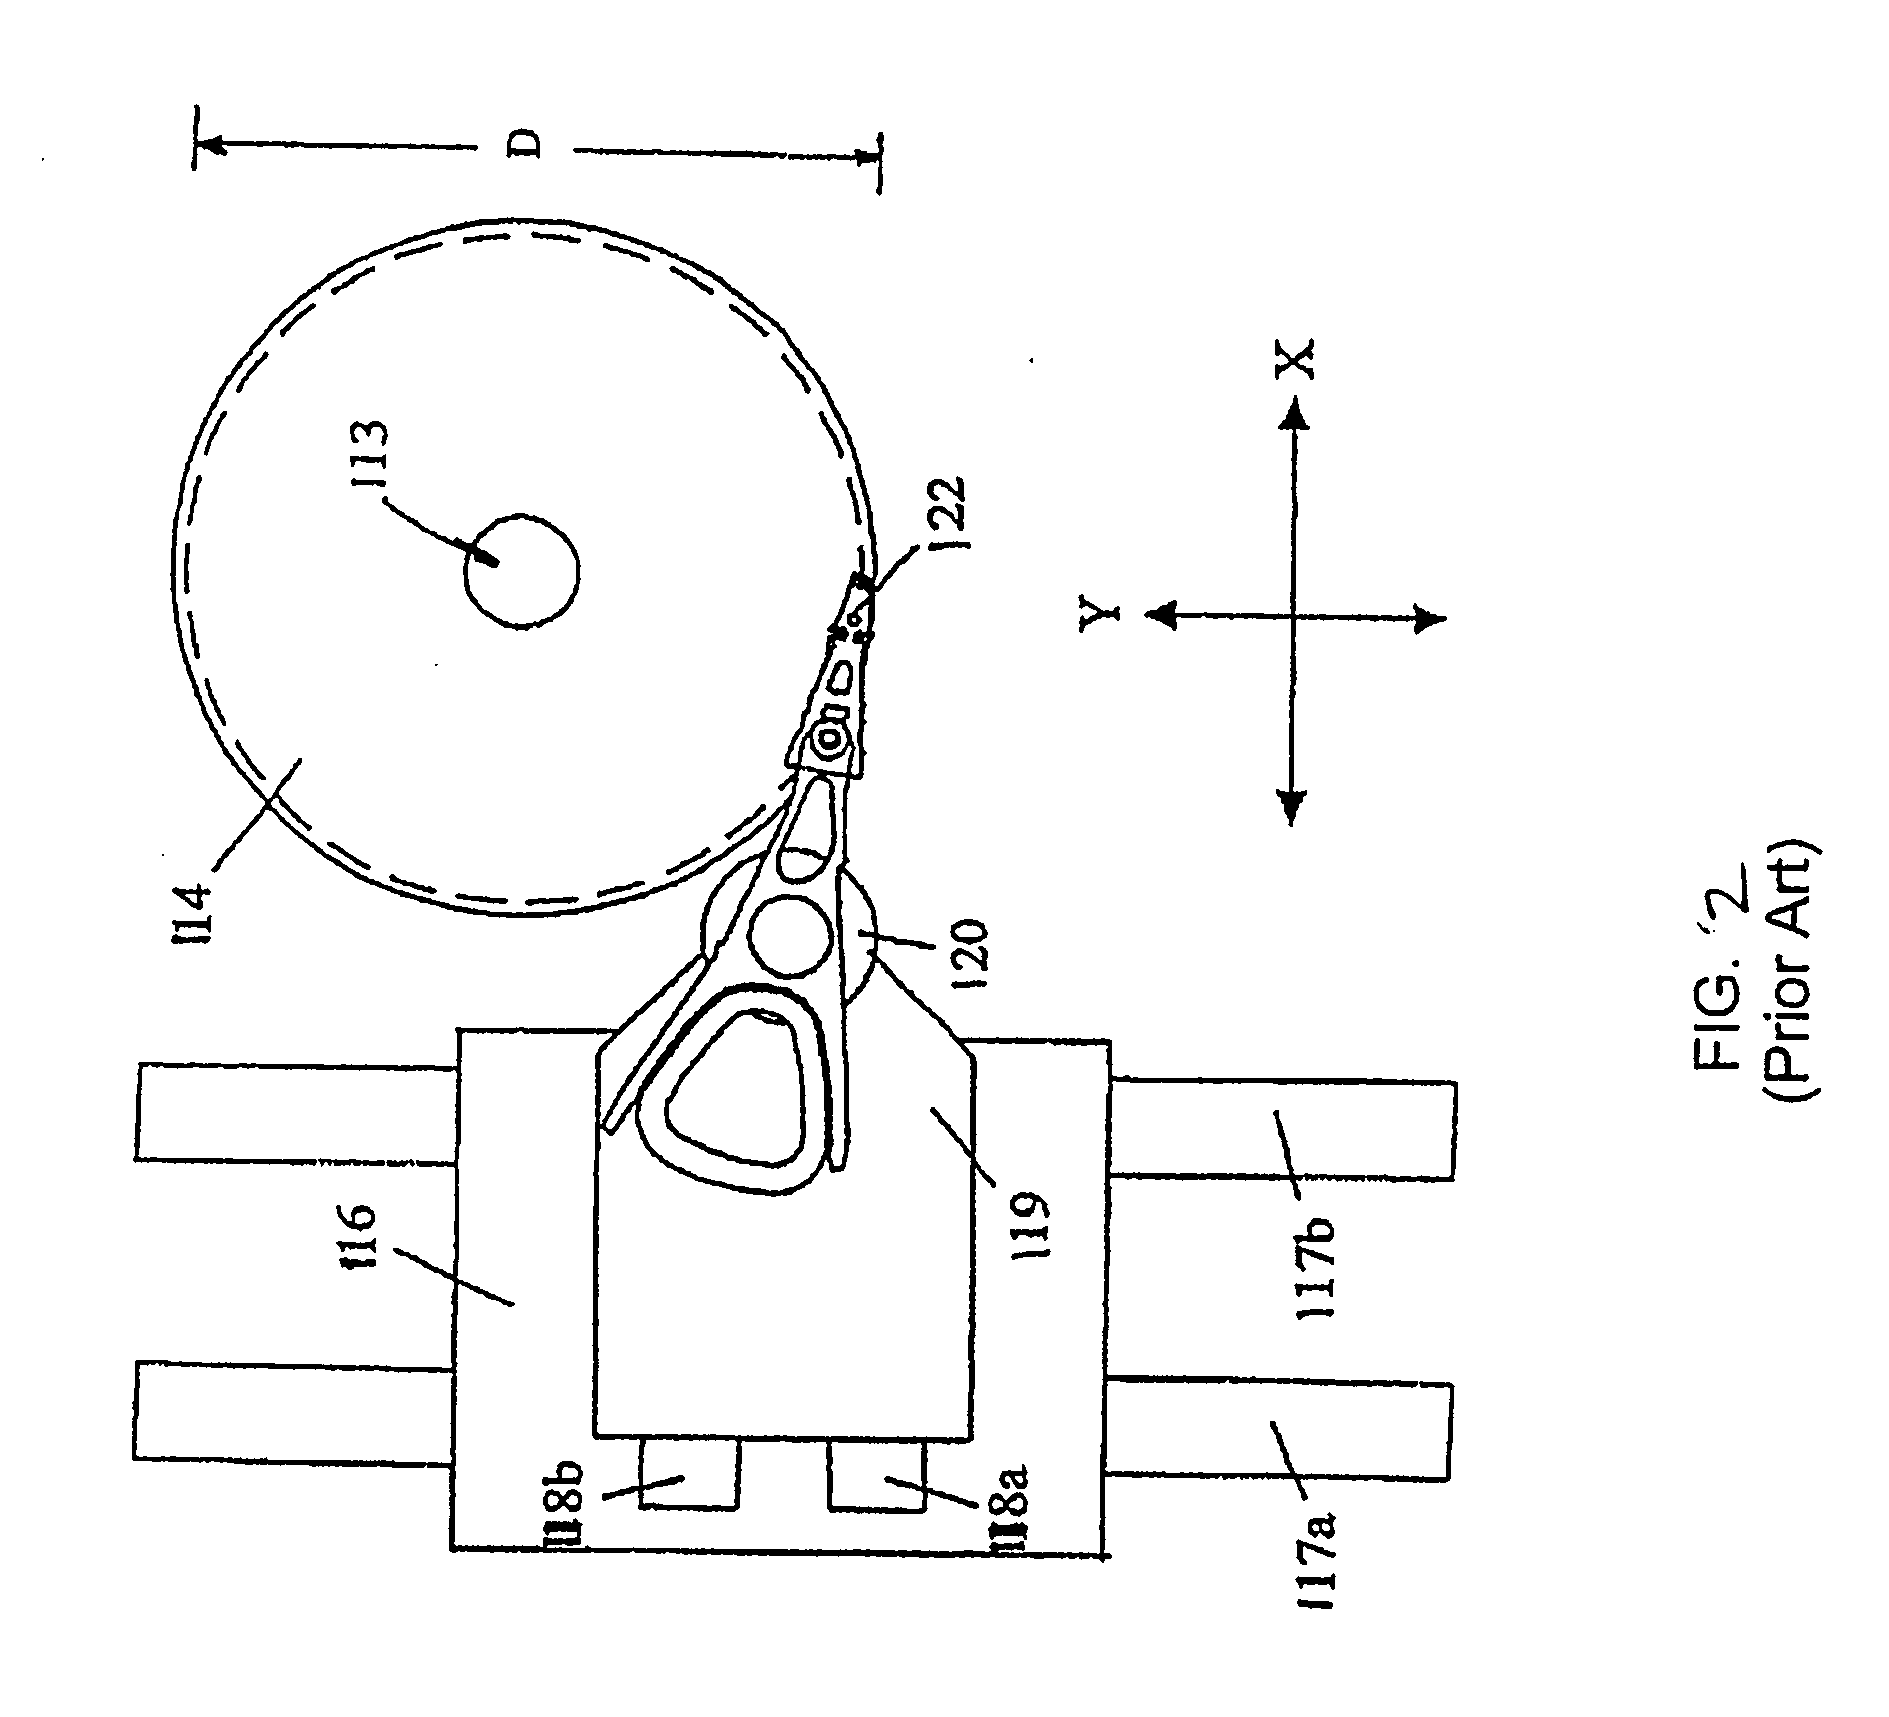 Vacuum chuck spinstand for testing magnetic heads and disks